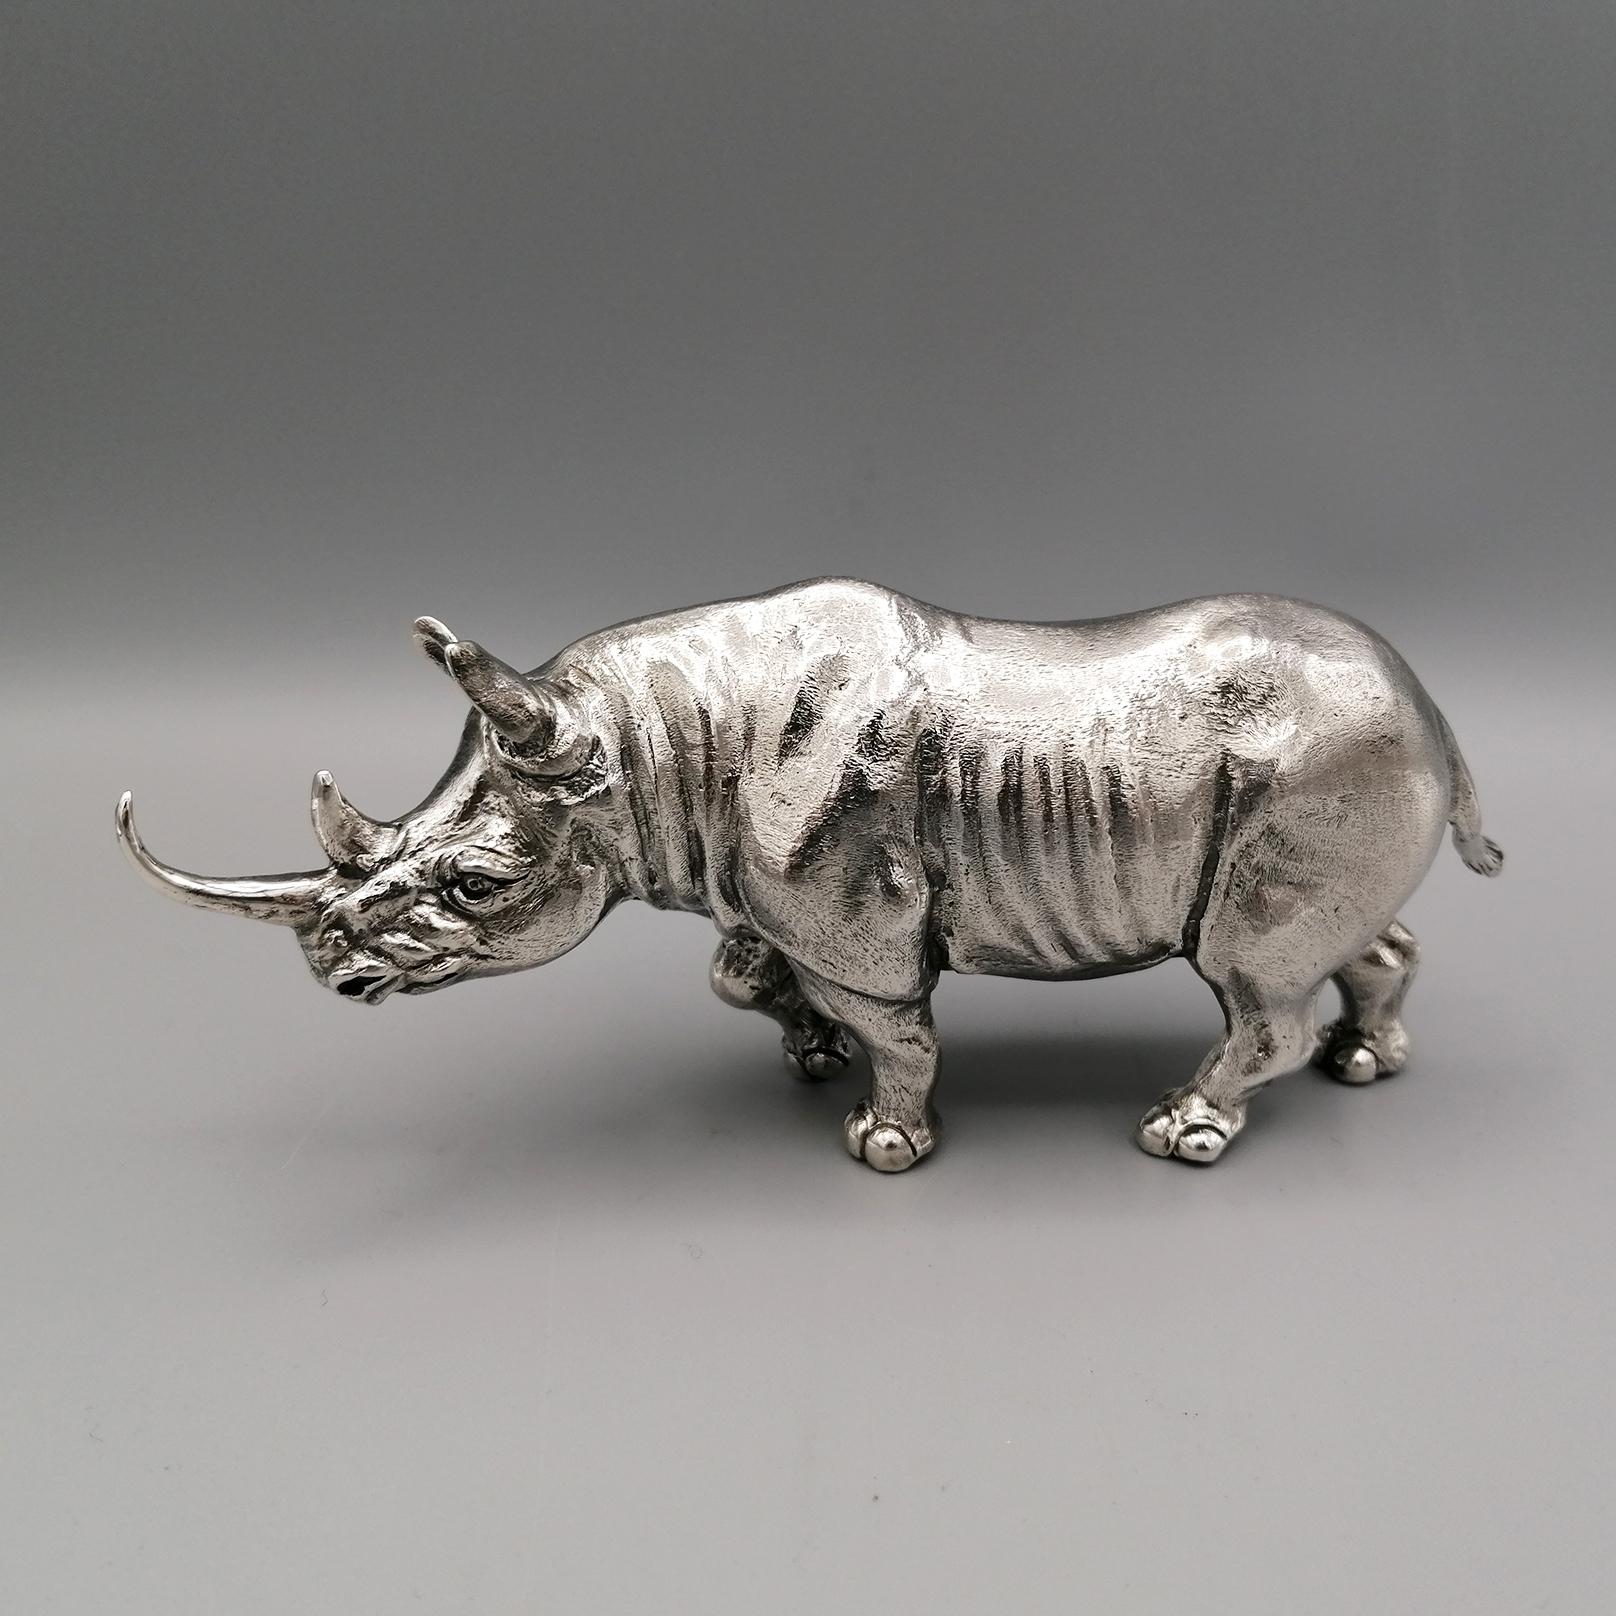 Solid 925 sterling silver rhino.
The sculpture was made with the casting technique and then finished completely by hand by expert chisellers to make the rhino's skin realistic and the whole sculpture as a whole.
   